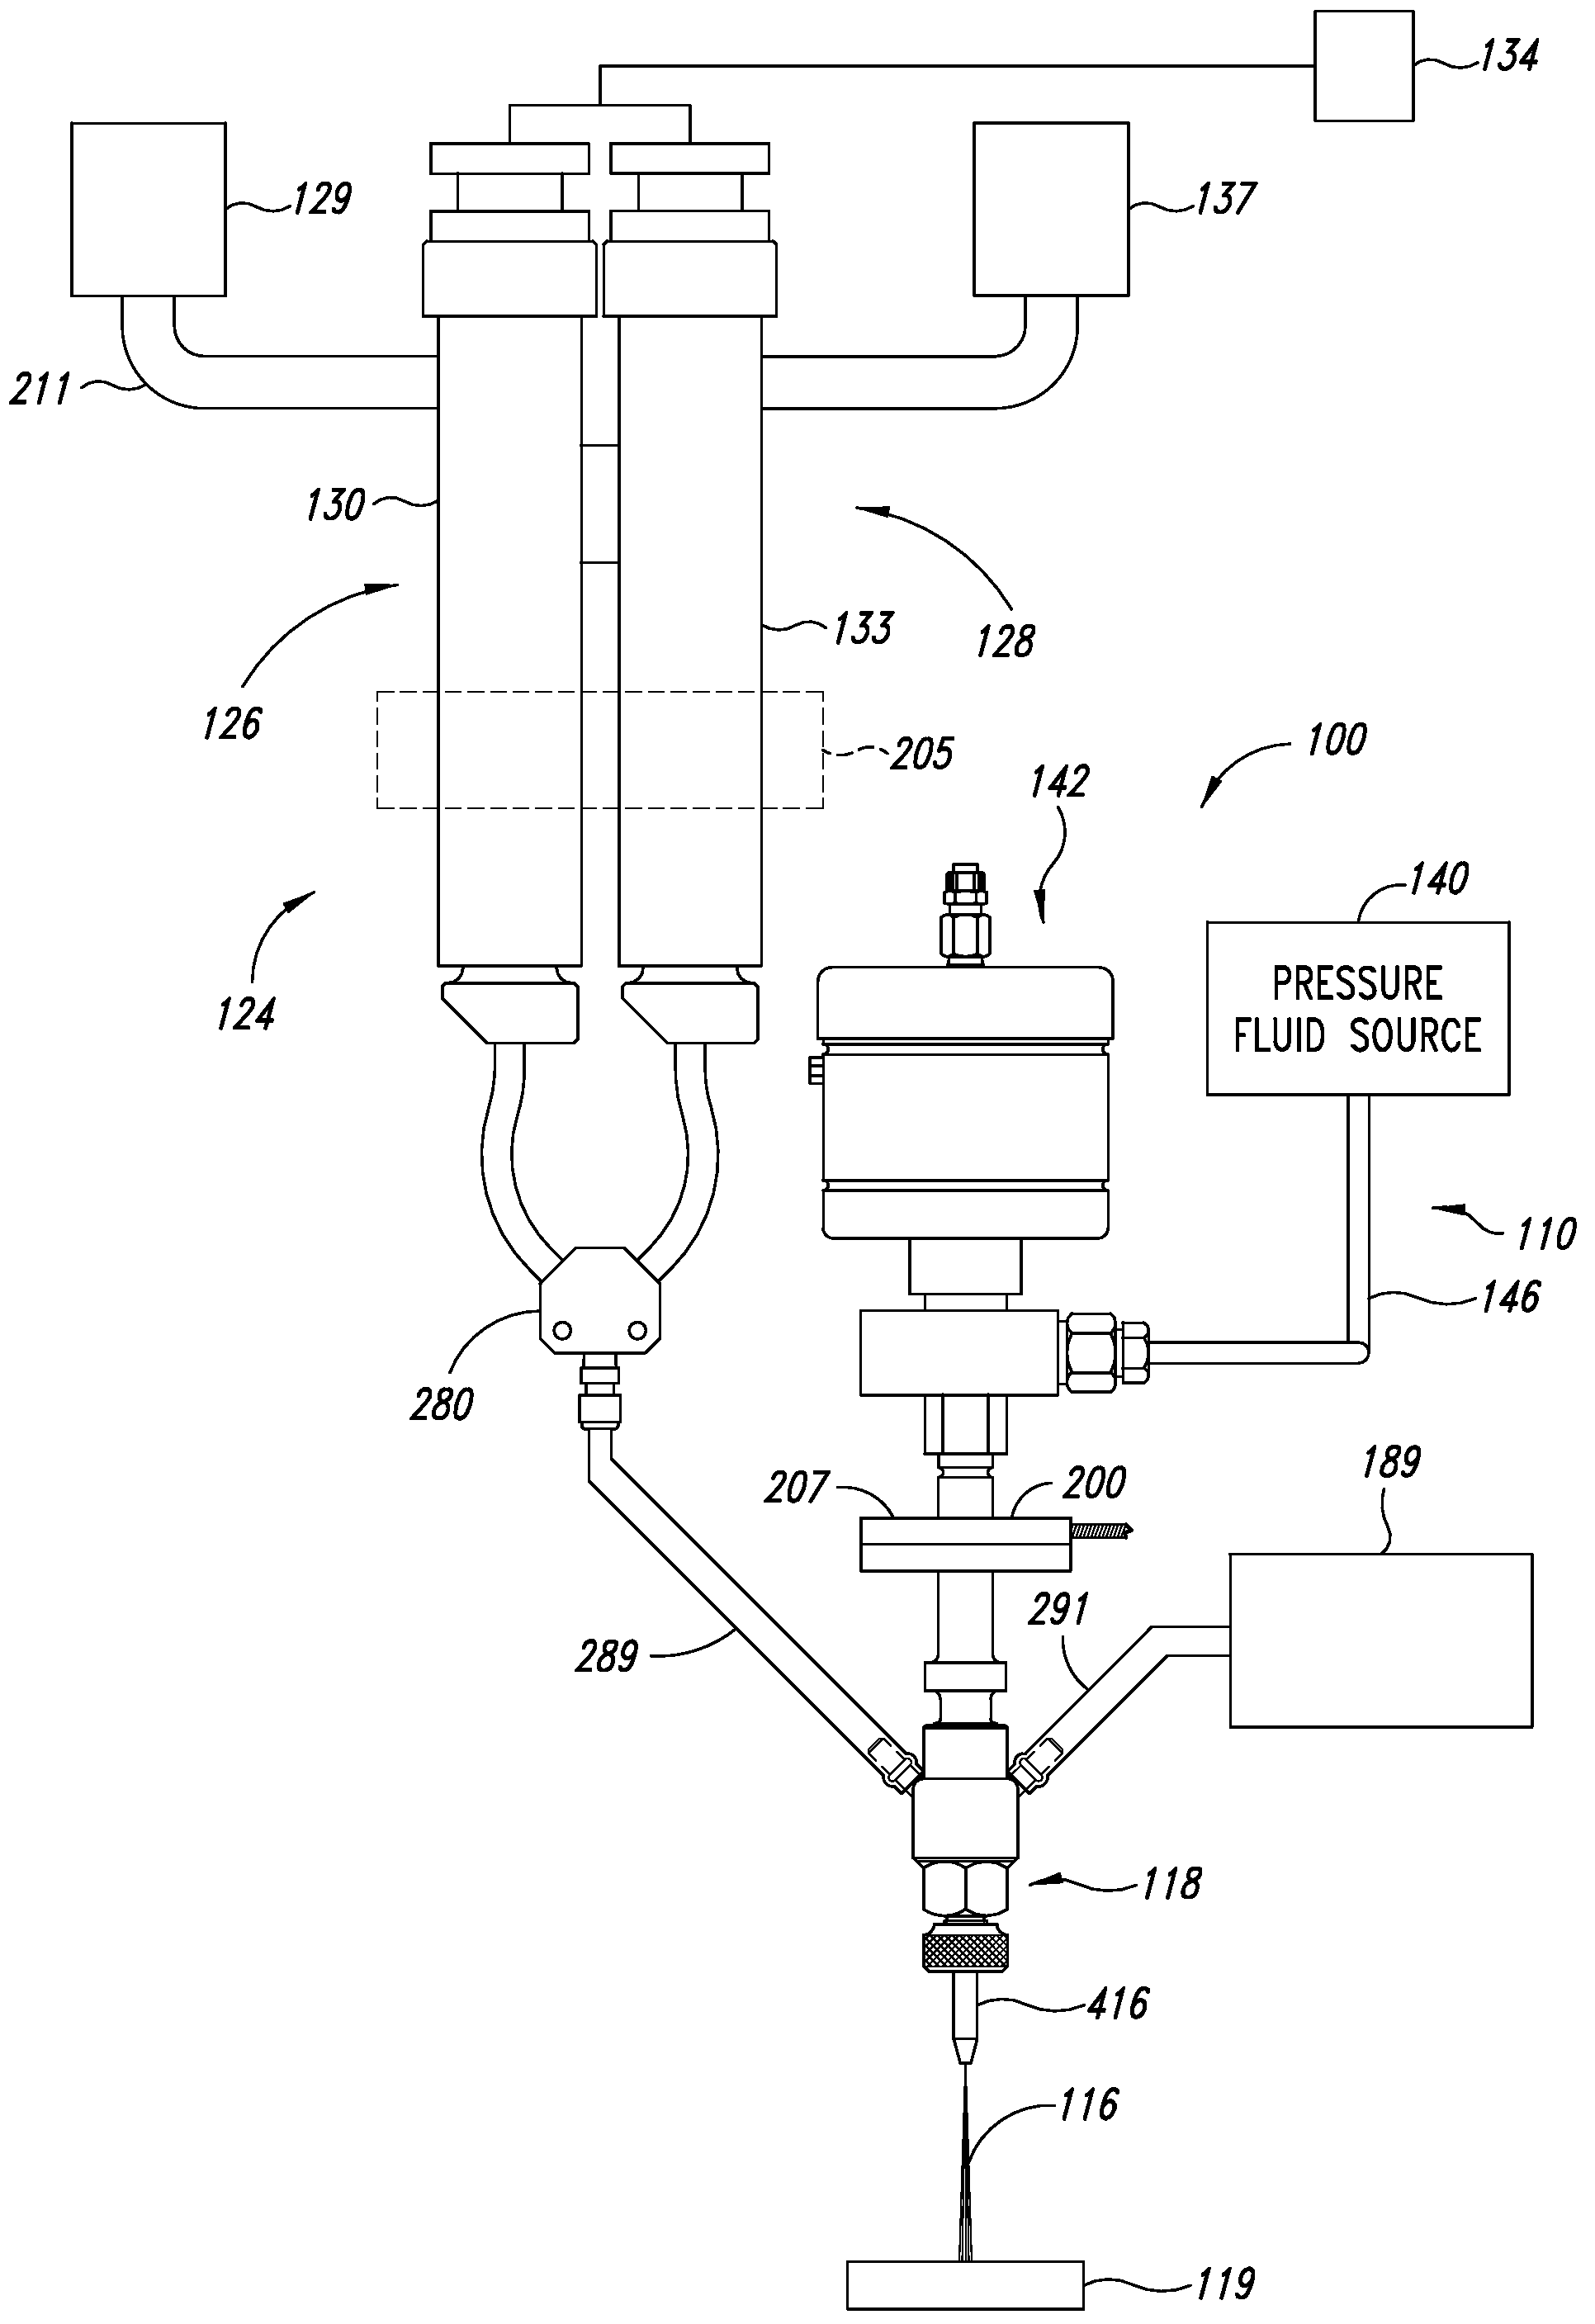 Processes and apparatuses for enhanced cutting using blends of abrasive materials